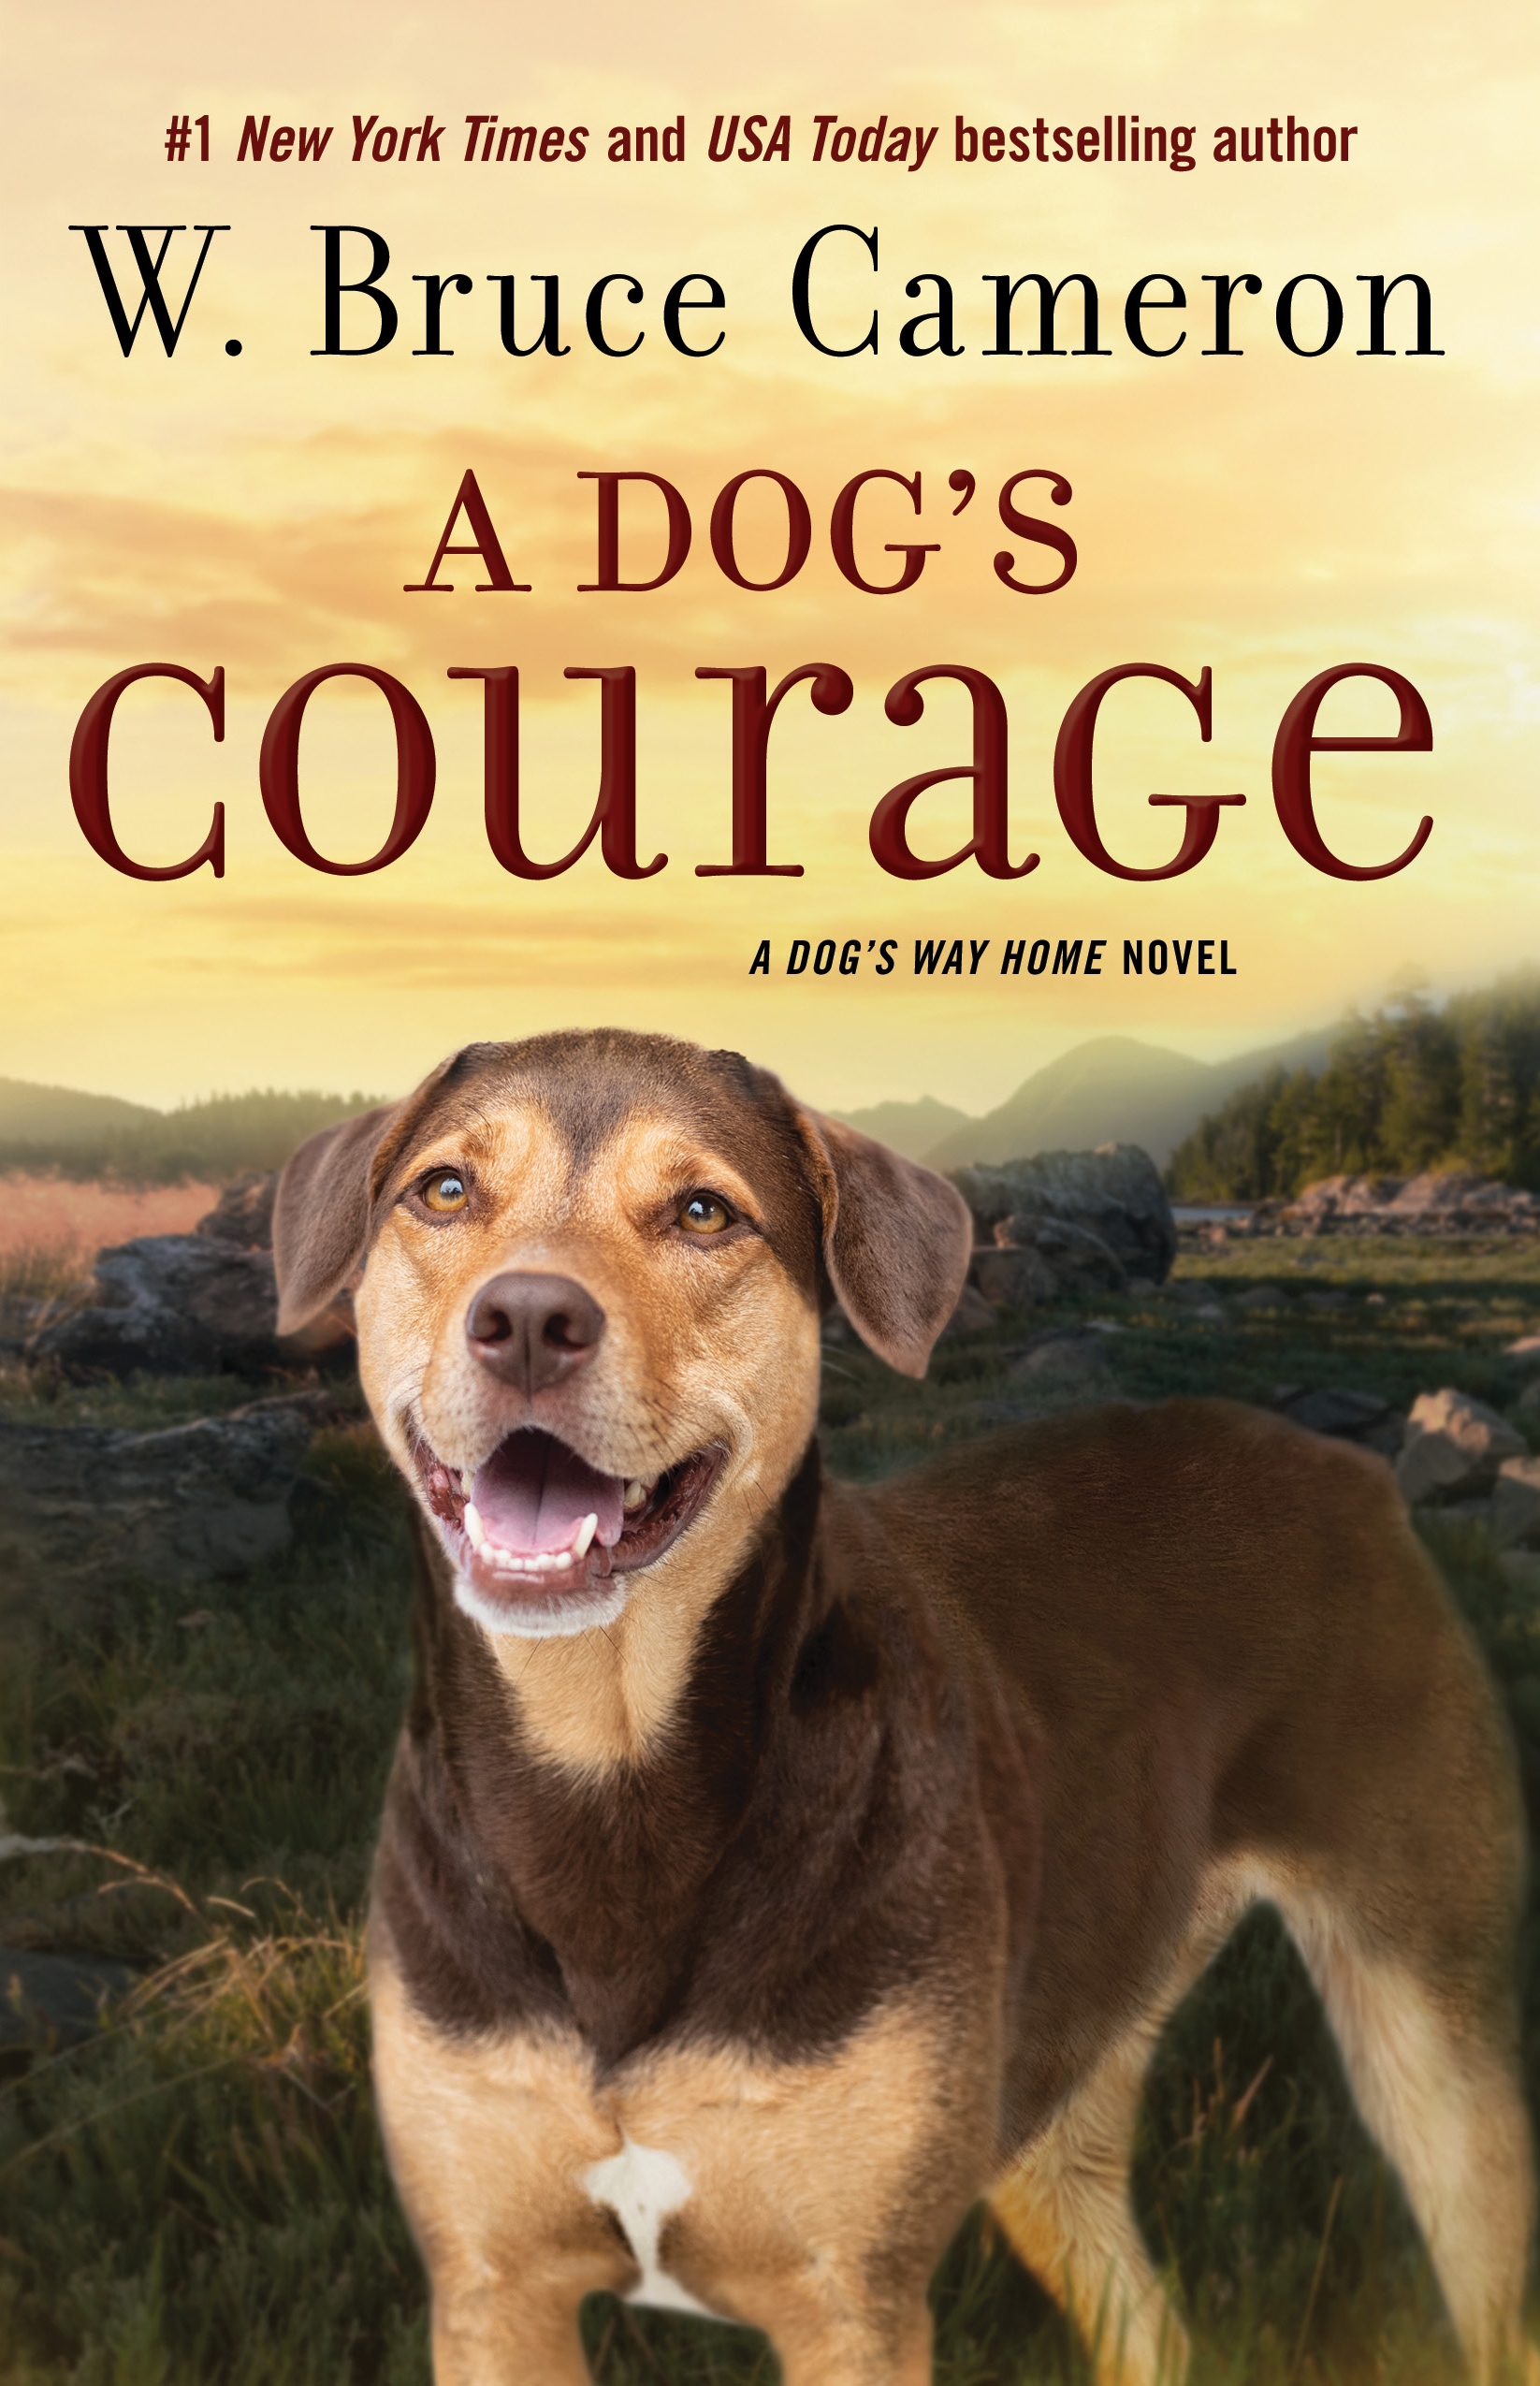 A Dog's Courage : A Dog's Way Home Novel by W. Bruce Cameron